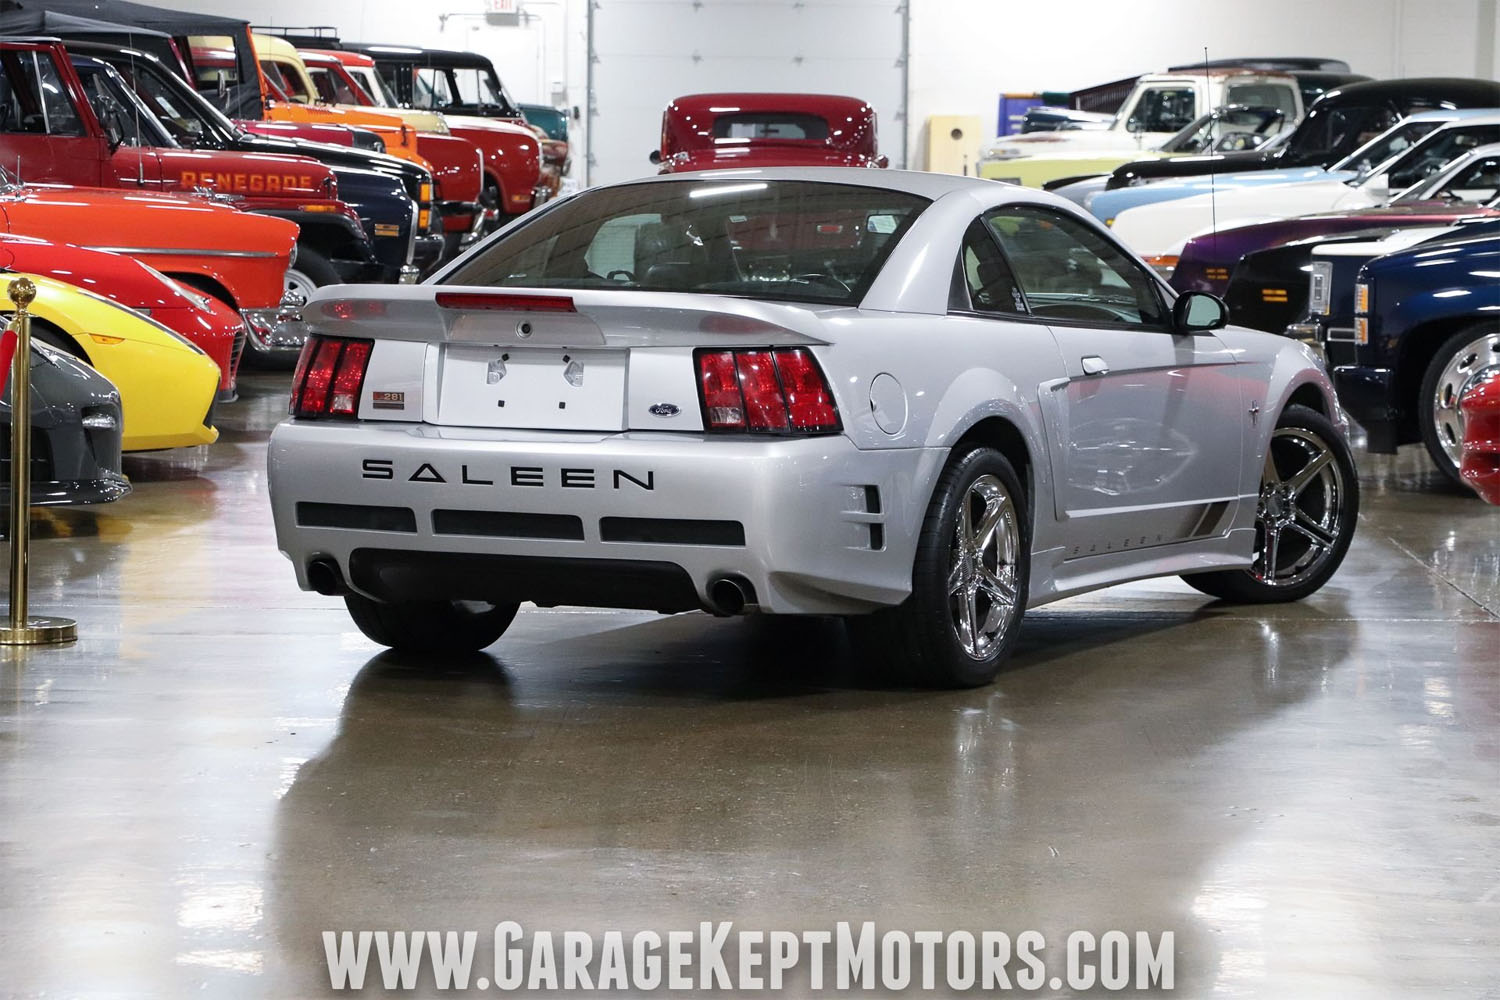 This 2001 Saleen S281sc Mustang Needs A New Home